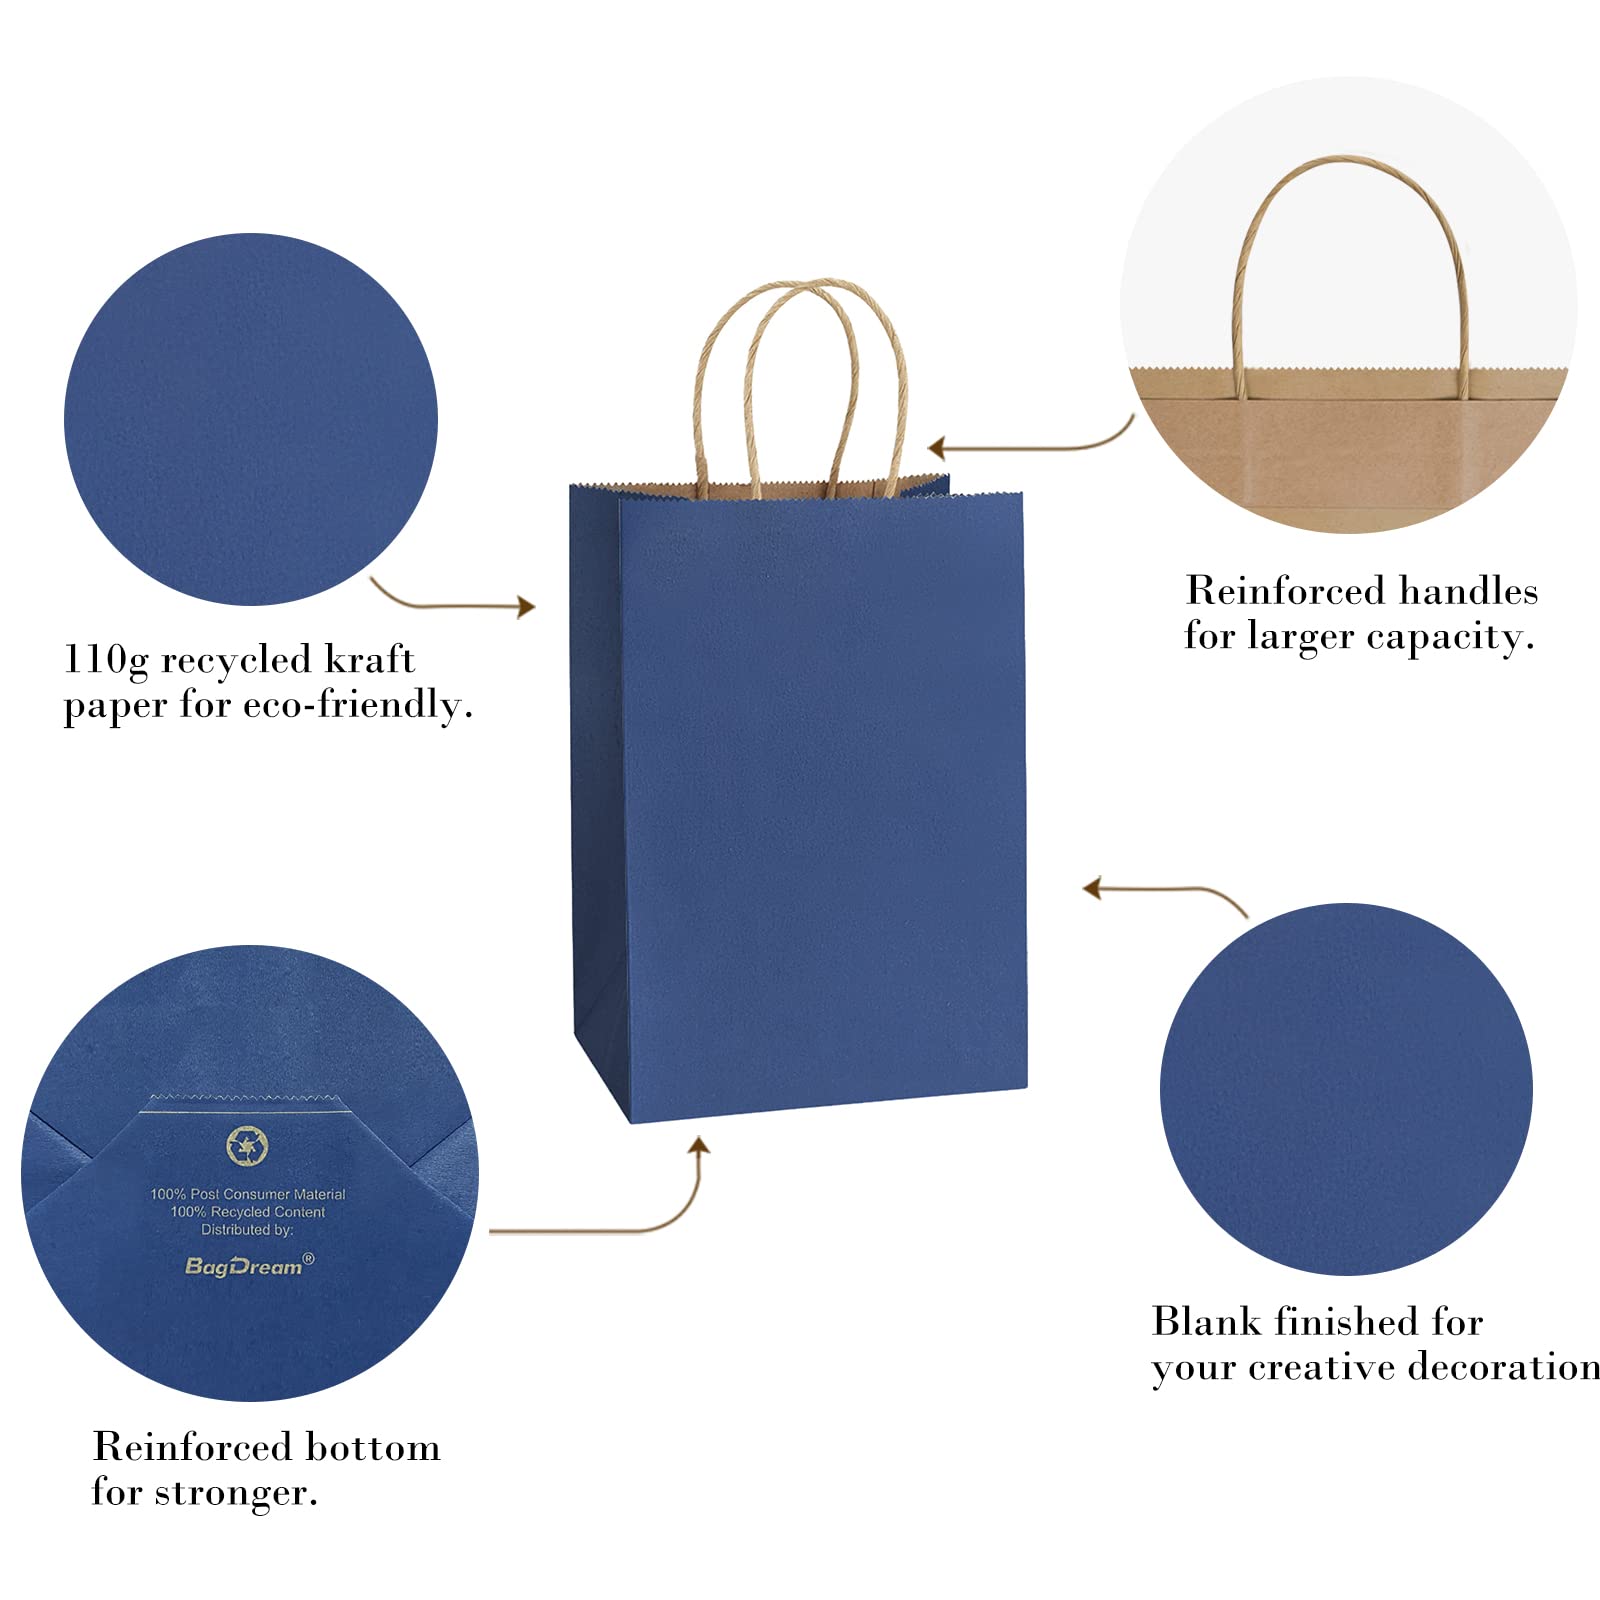 BagDream Kraft Gift Bags 50Pcs 5.25x3.75x8 Inches Small Paper Bags with Handles Bulk Wedding Party Favor Bags Shopping Retail Merchandise Bags Navy Blue Gift Bags Paper Sacks